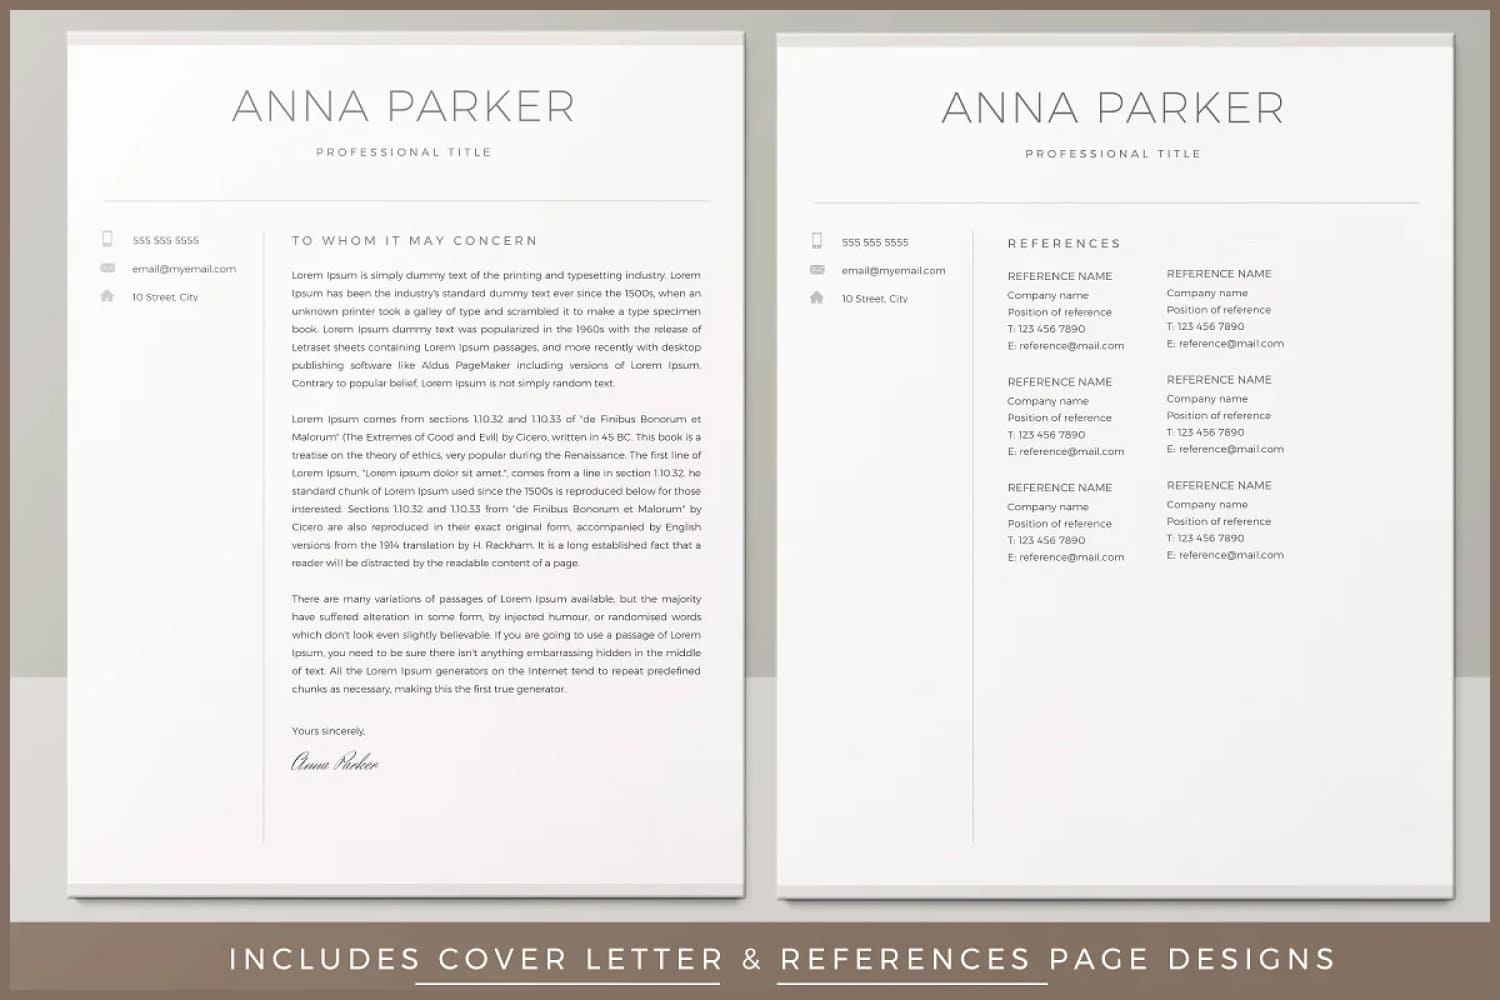 Two pages of a collage with a cover letter and links to referents.